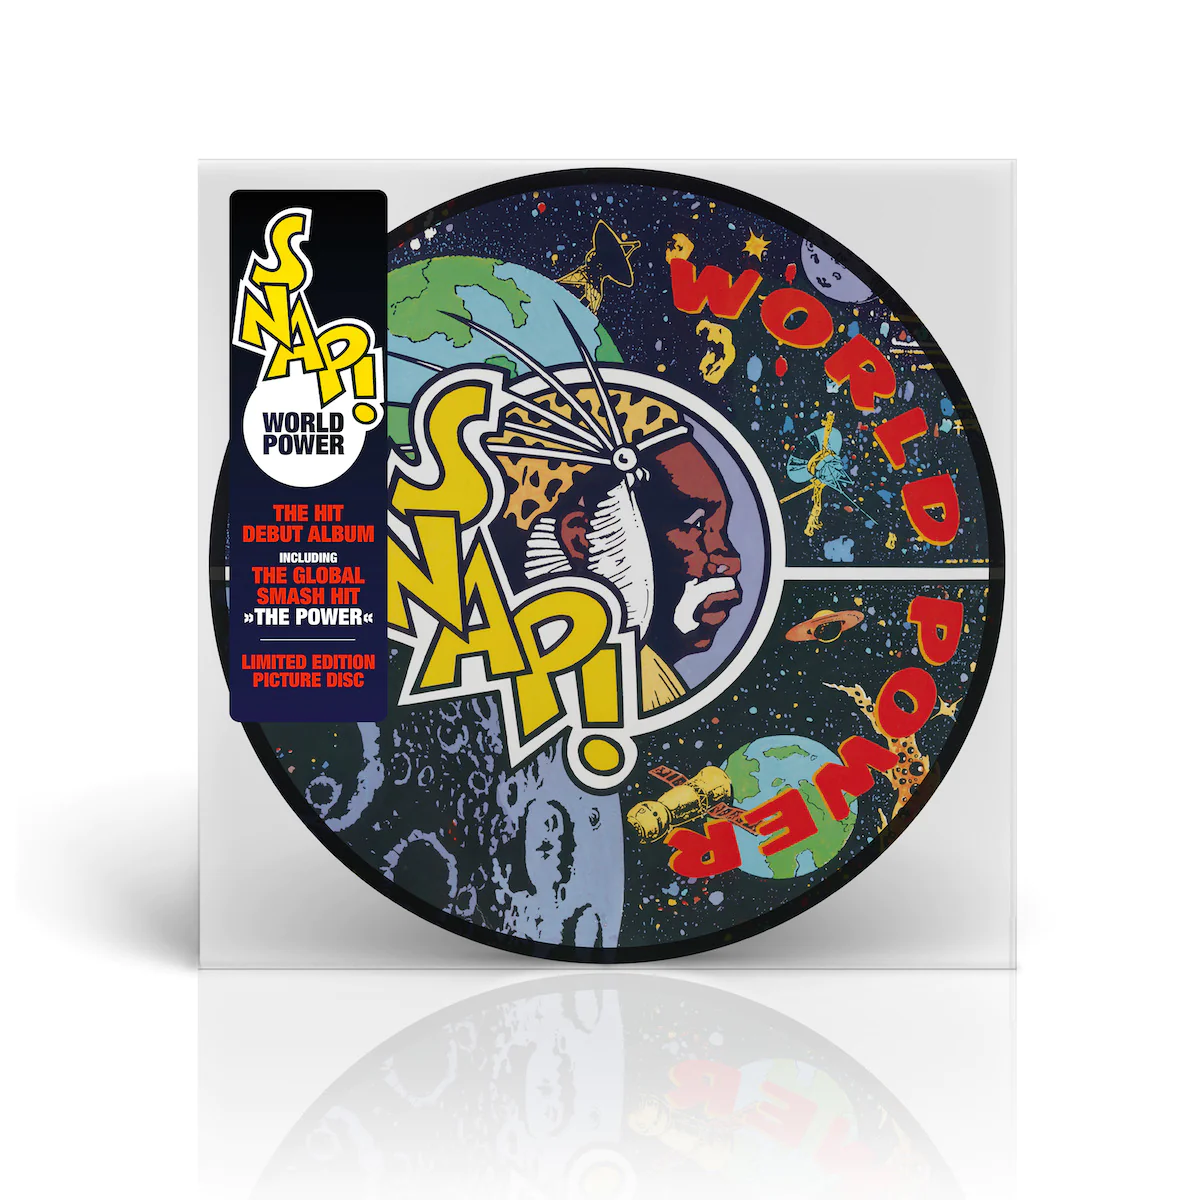 SNAP! - World Power (Limited Edition Picture Disc)